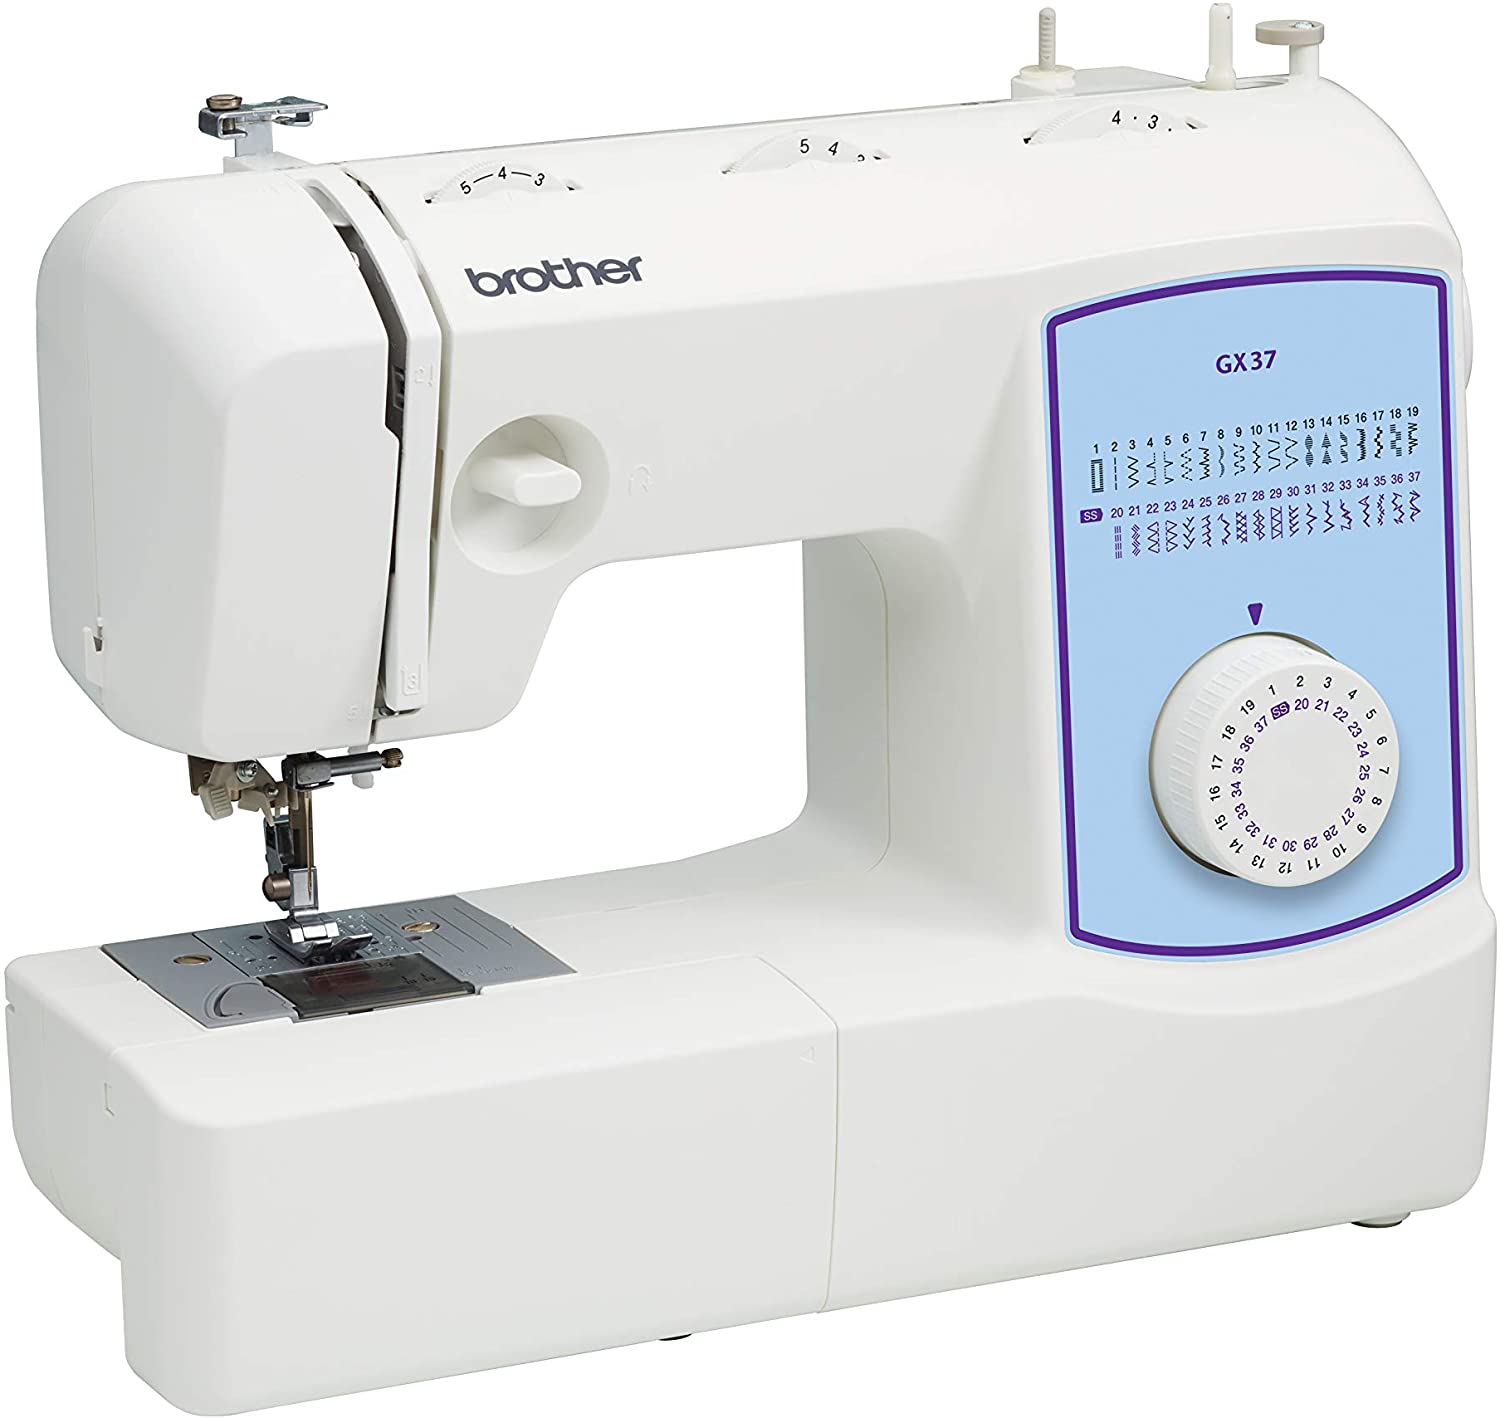 8 Best Sewing Machines for Advanced Sewers – Reviewed (Jan. 2021)